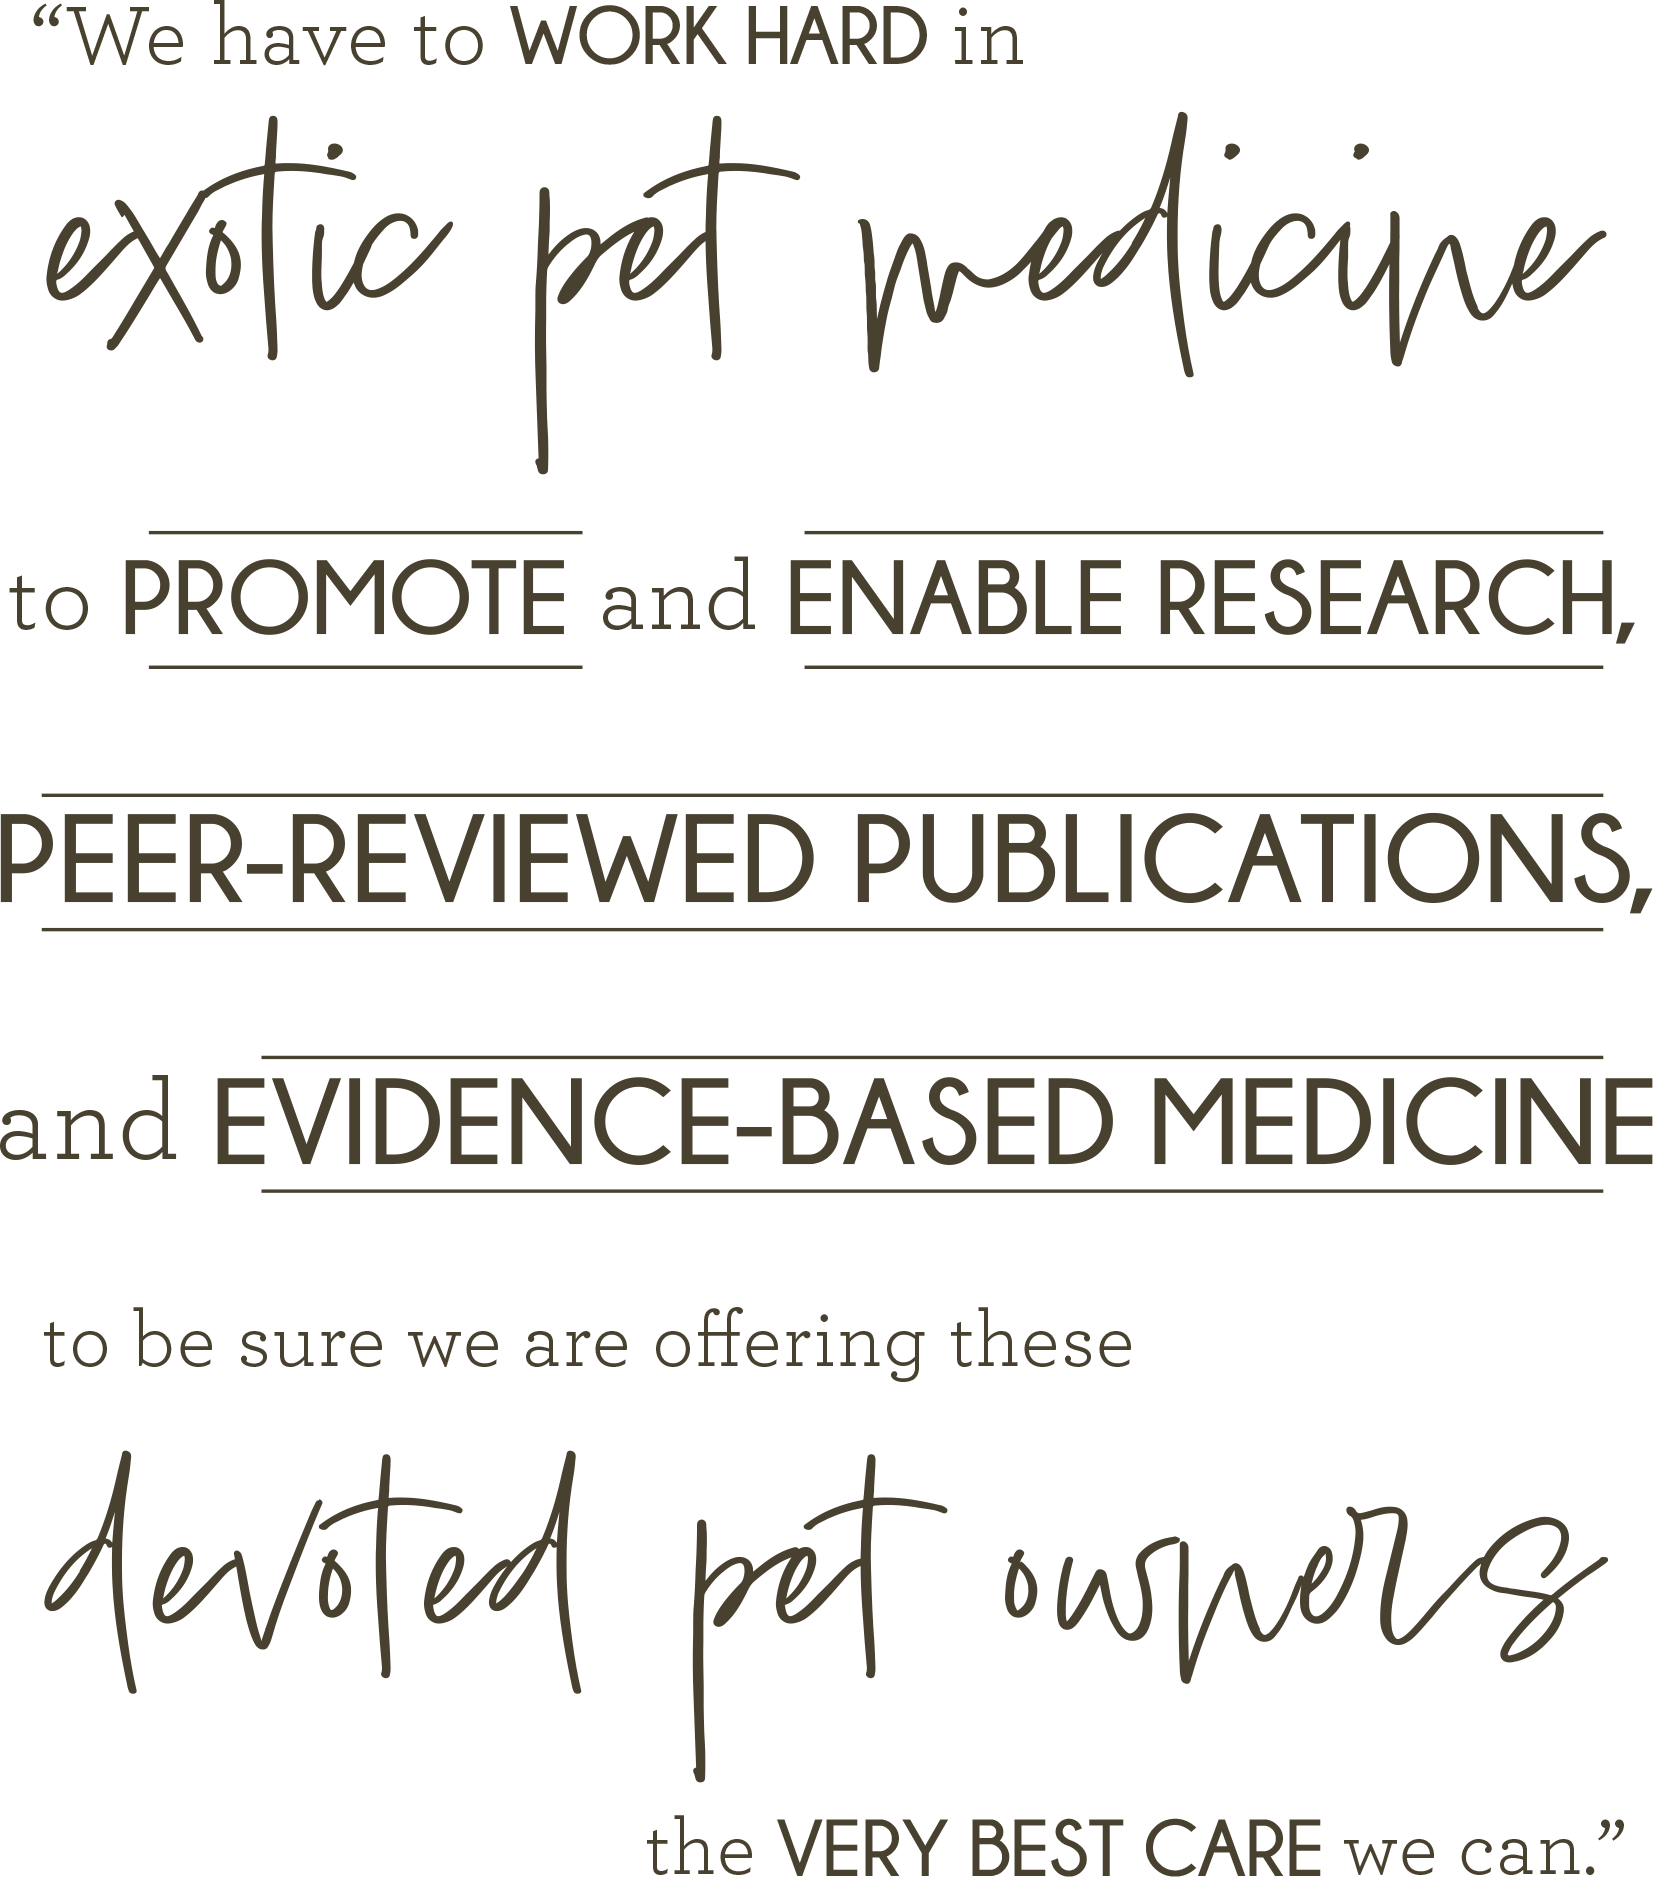 "We have to WORK HARD in exotic pet medicine to promote and enable research, peer-reviewed publications, and evidence-based medicine to be sure we are offering these devoted pet owners the very best care we can.